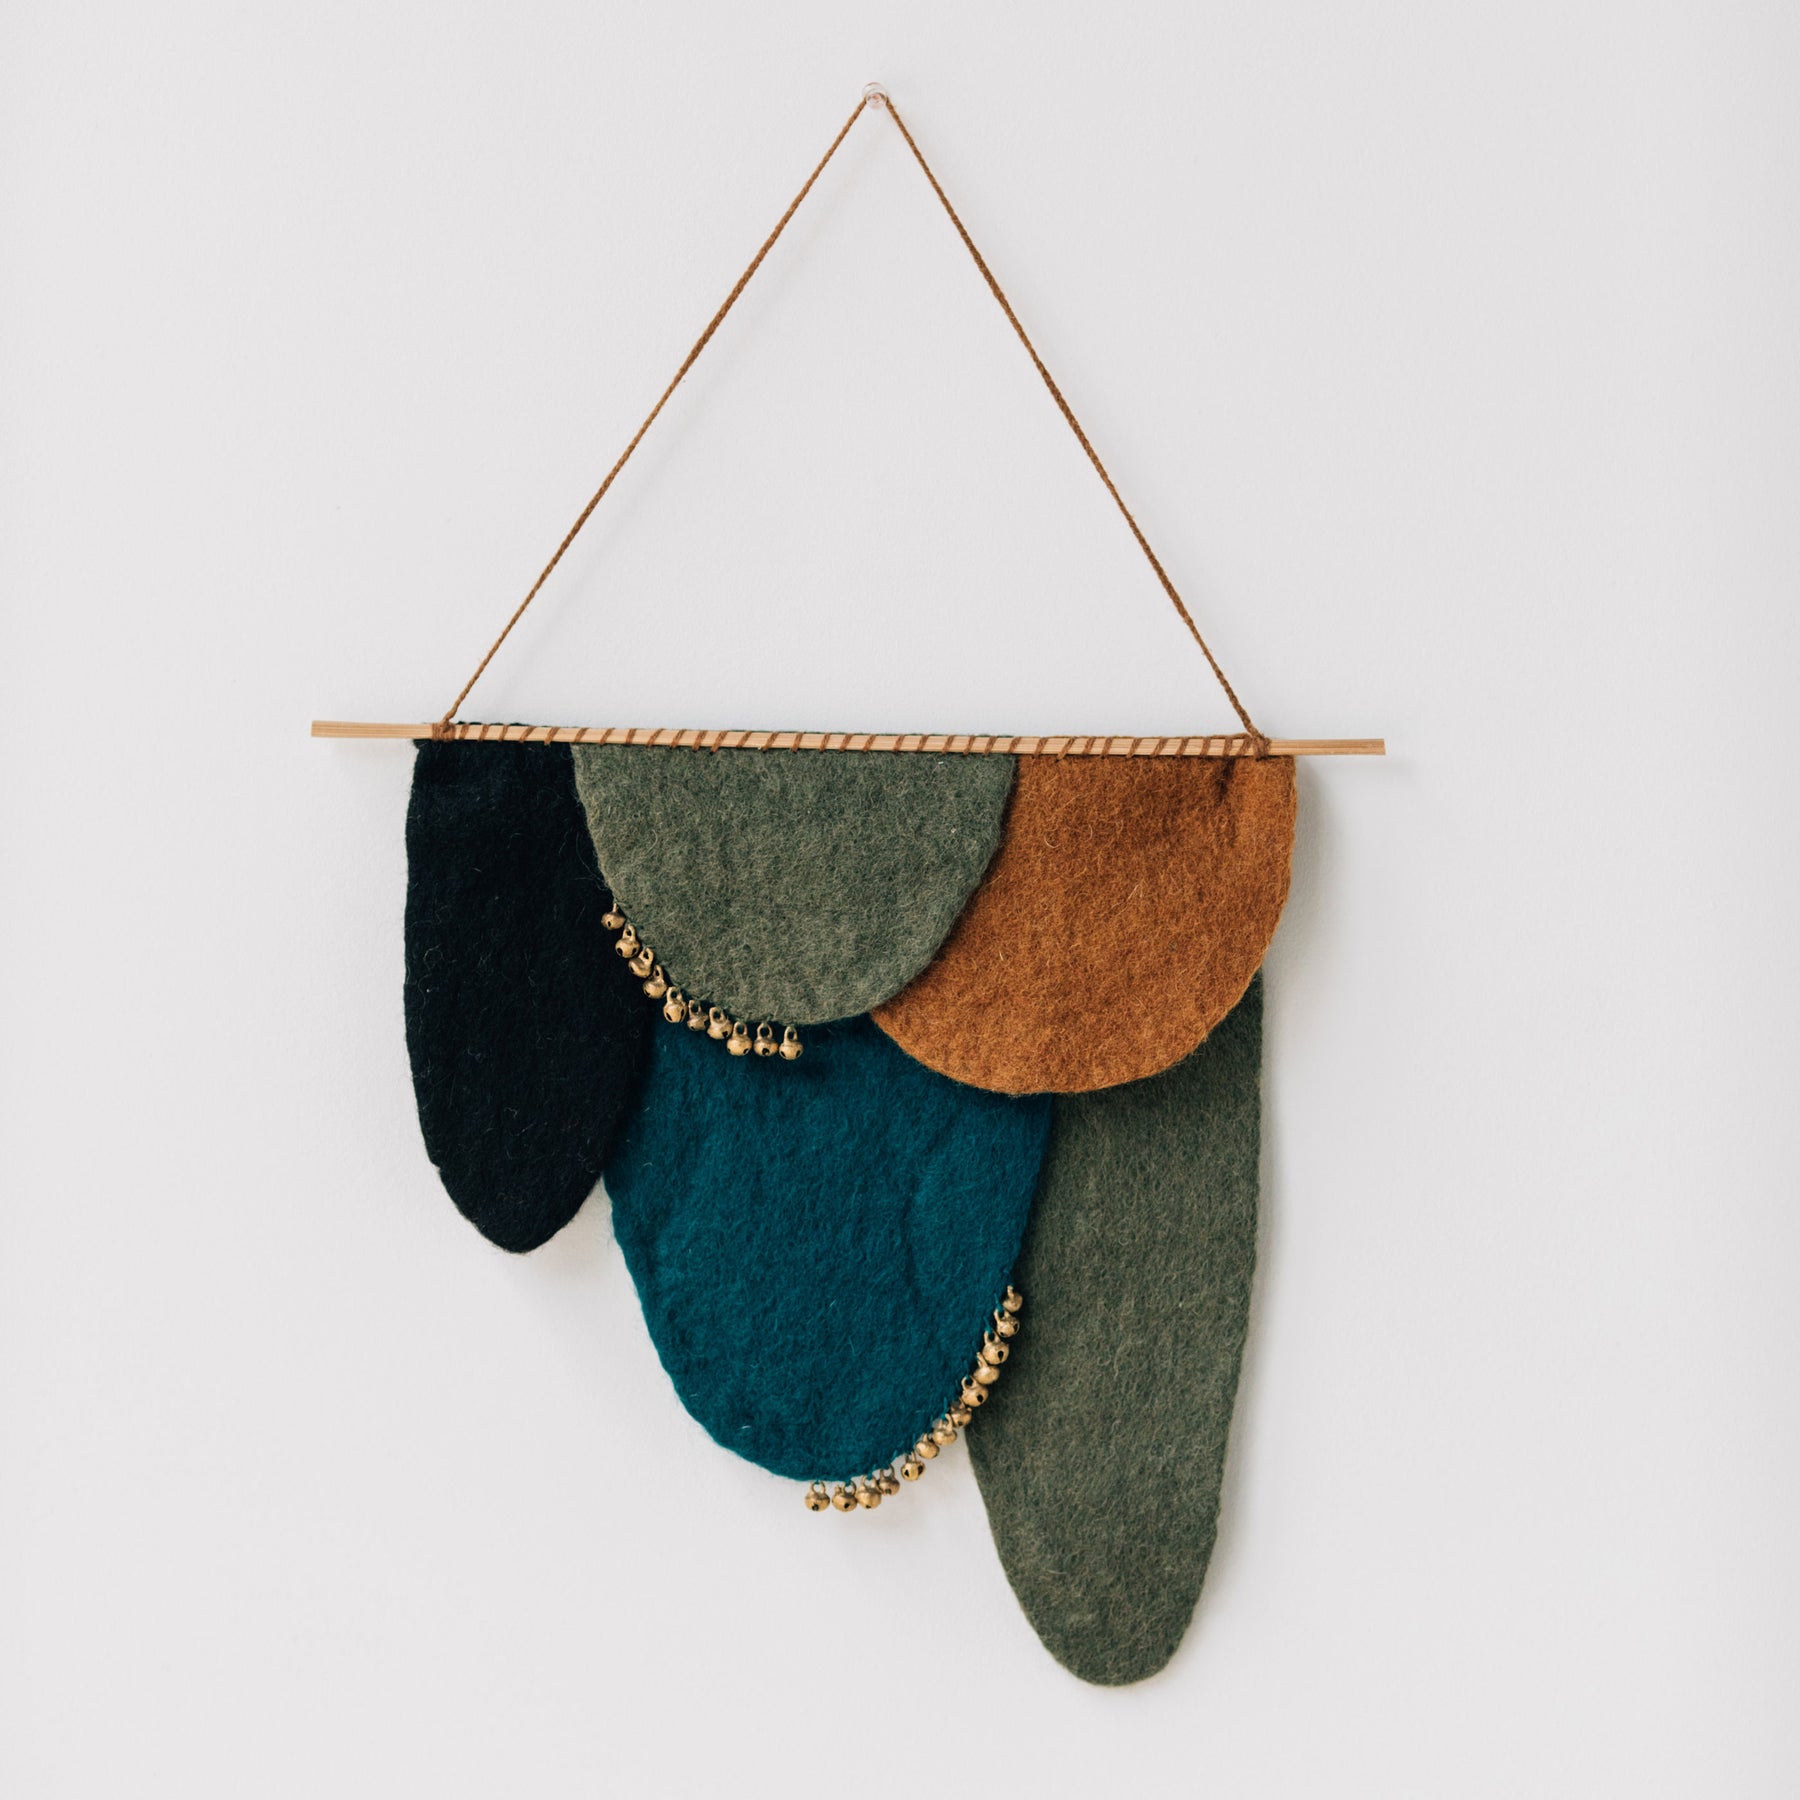 Favor Scale Wall Hanging